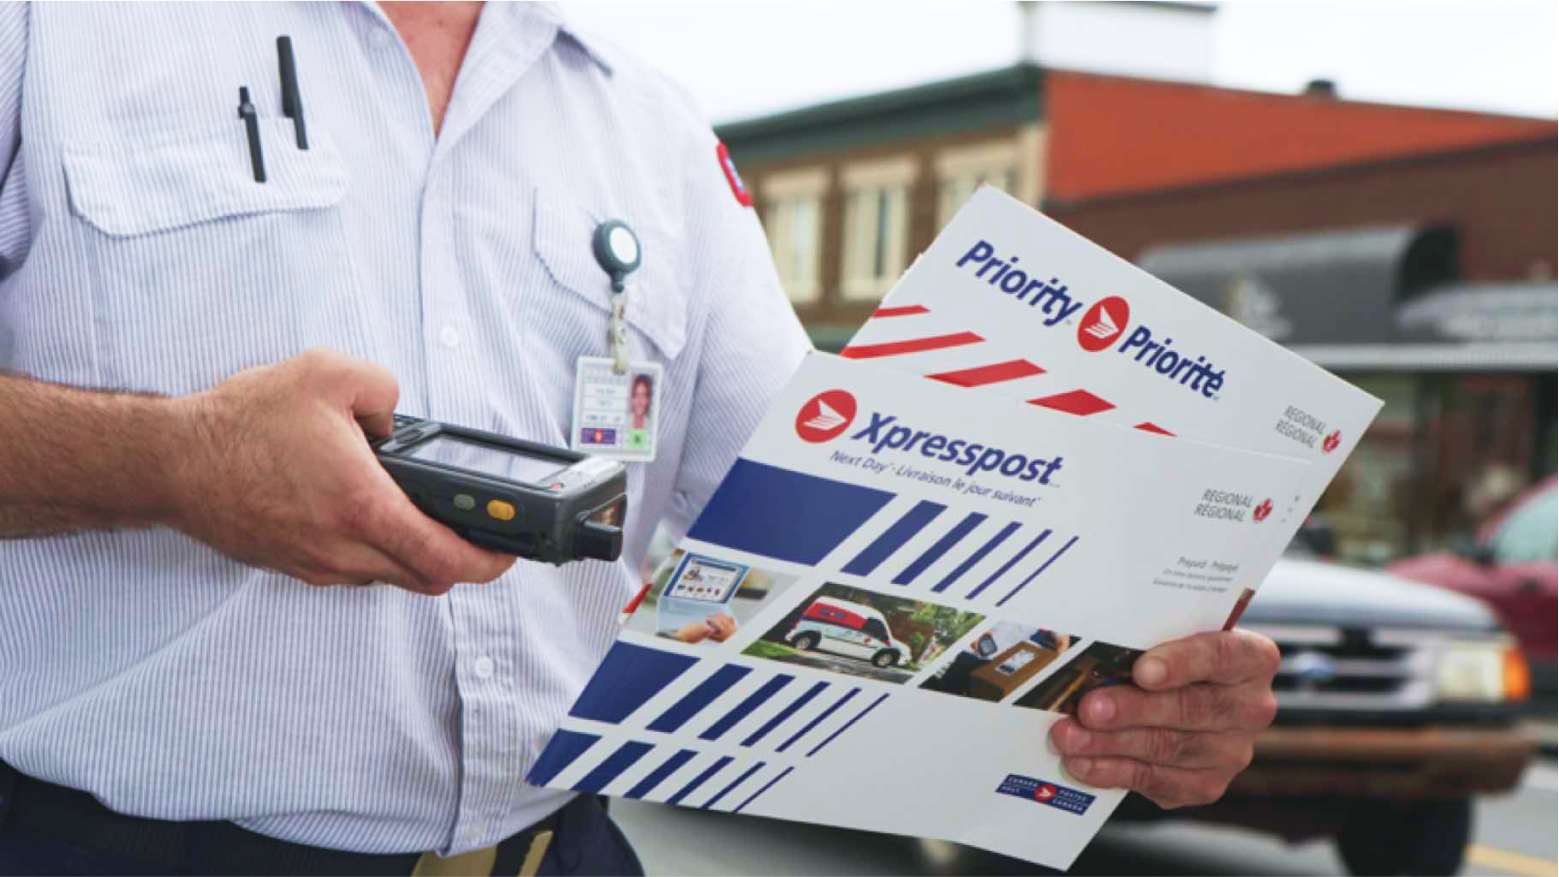 A Canada Post letter carrier scans two Xpresspost prepaid envelopes to update their tracking information.